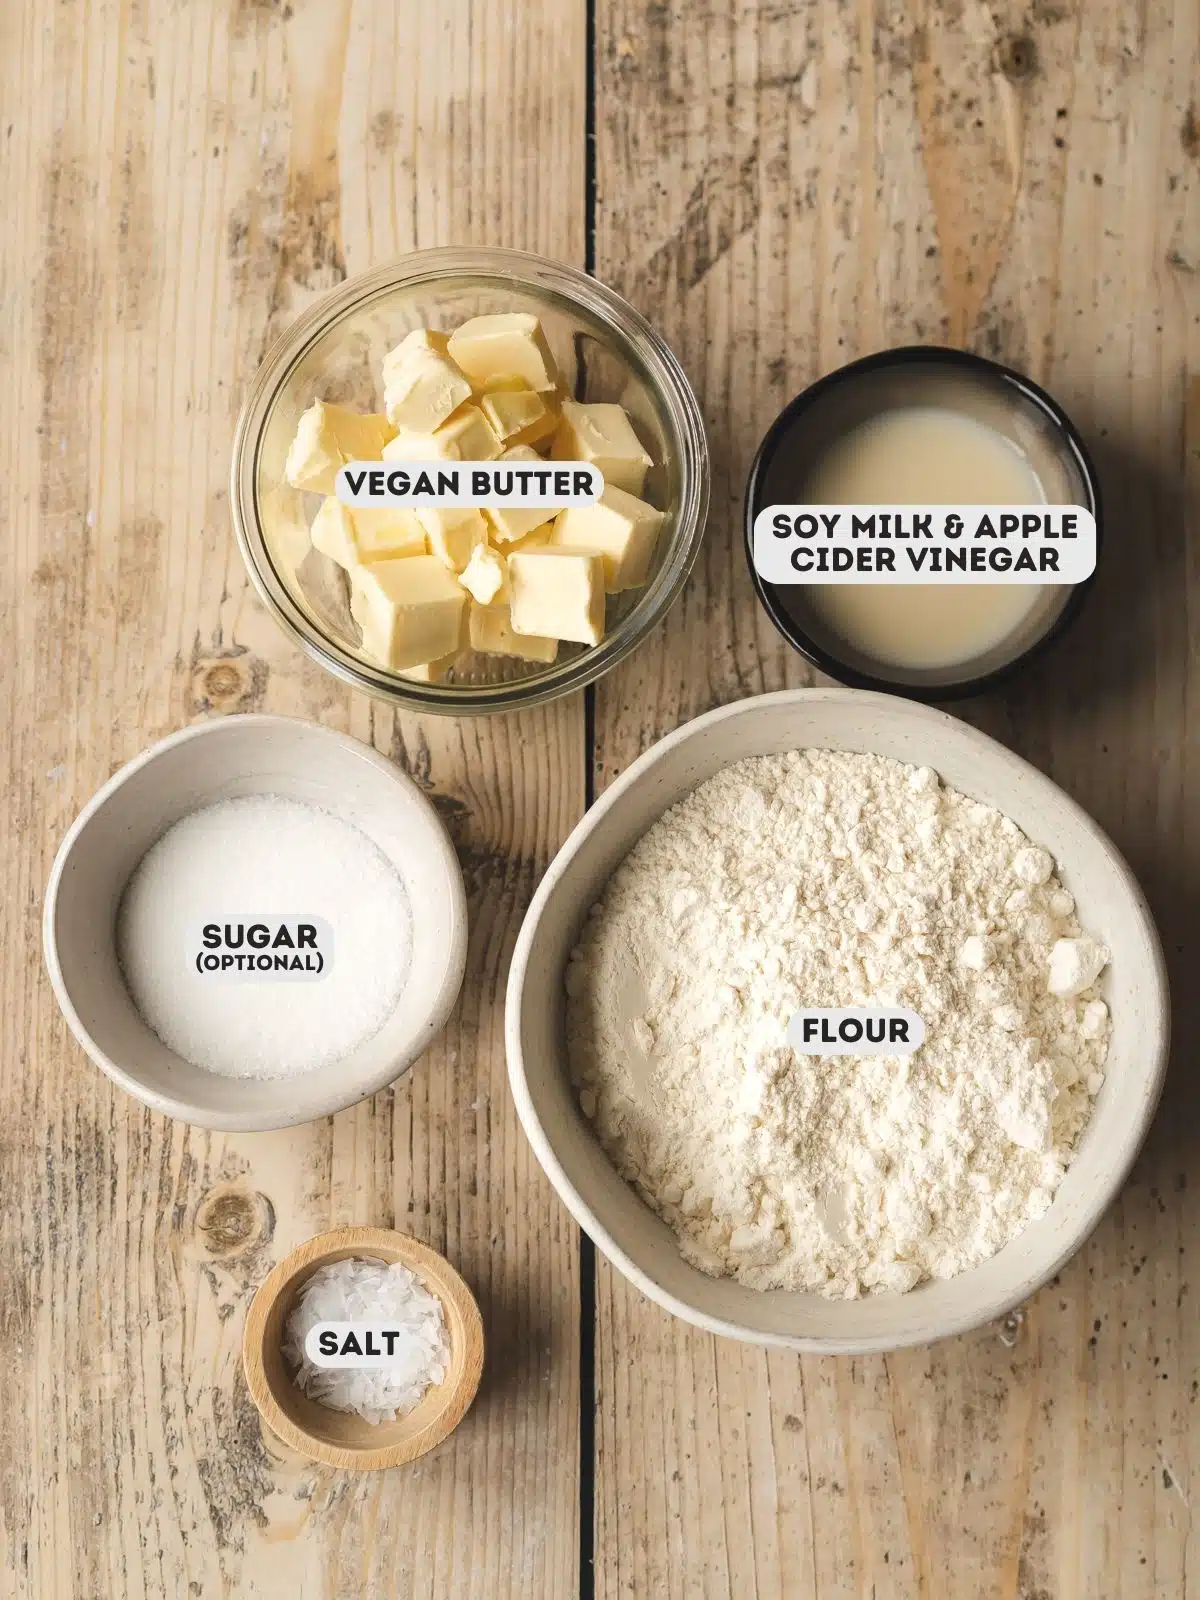 ingredients for vegan pie crust measured out in bowls on a wooden surface with text overlay.